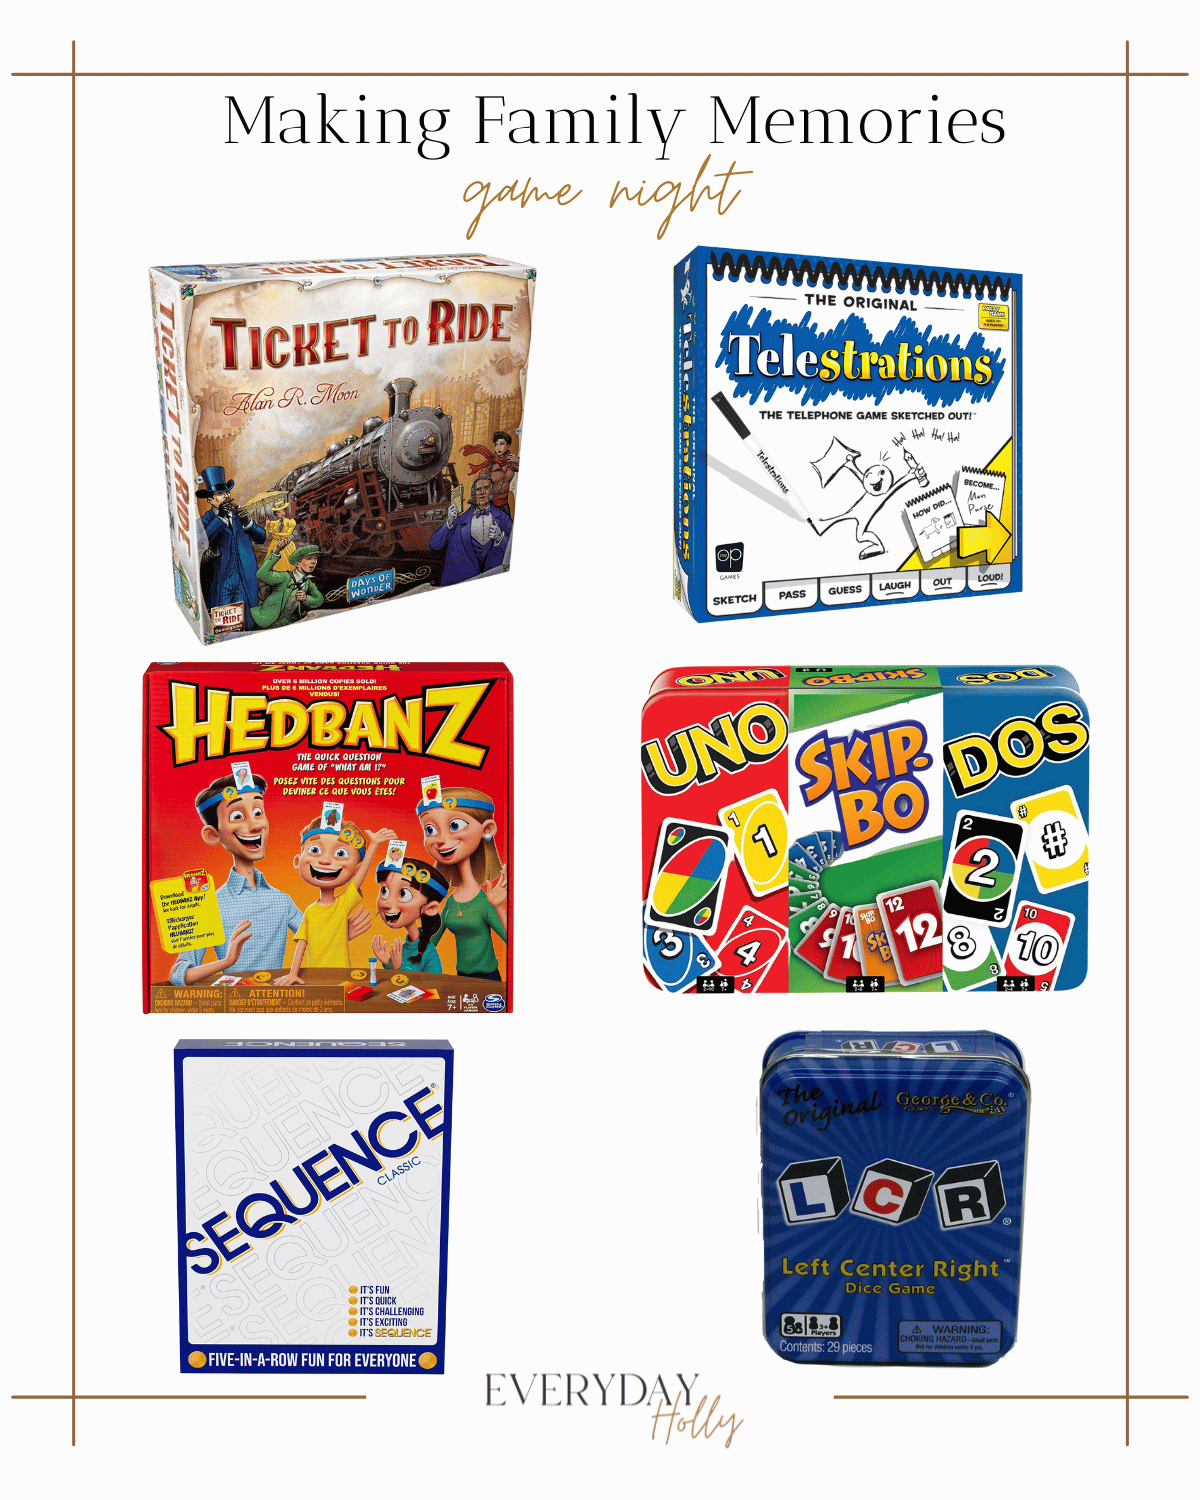 game night, family game night, ticket to ride game, telestrations game, hedbanz game, uno game pack, sequence game, left center right 